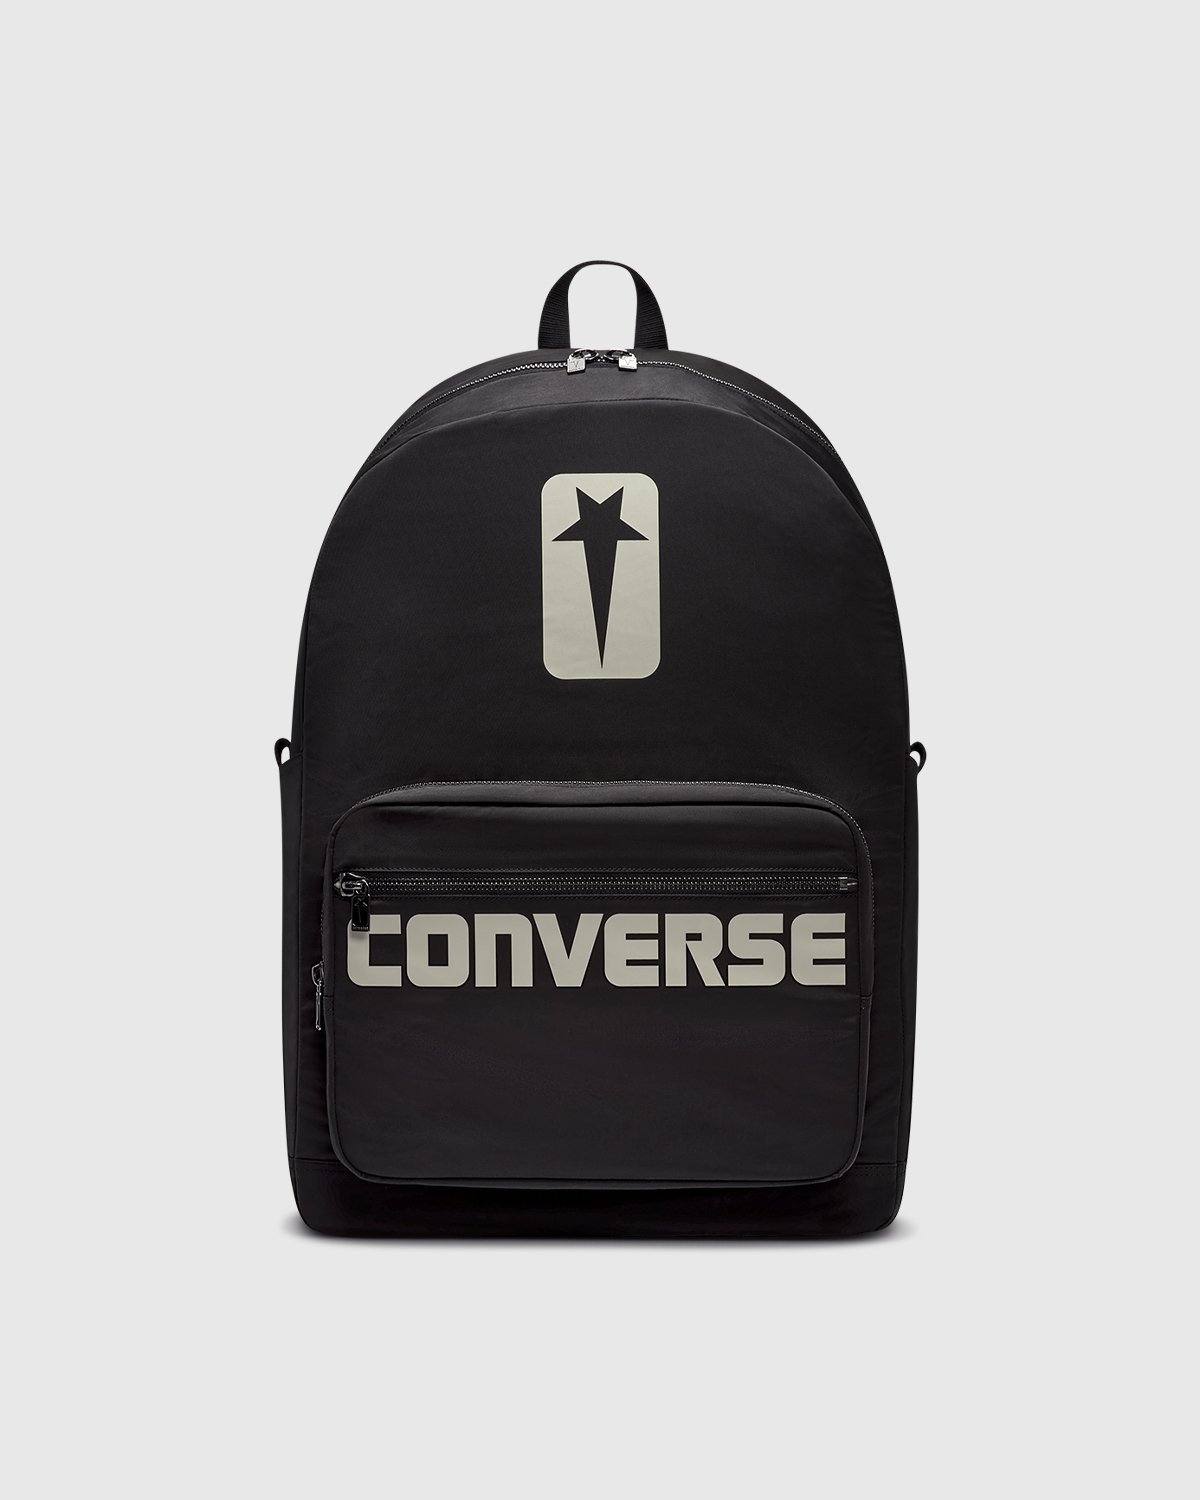 Converse x Rick Owens - Oversized Backpack Black - Accessories - Black - Image 1